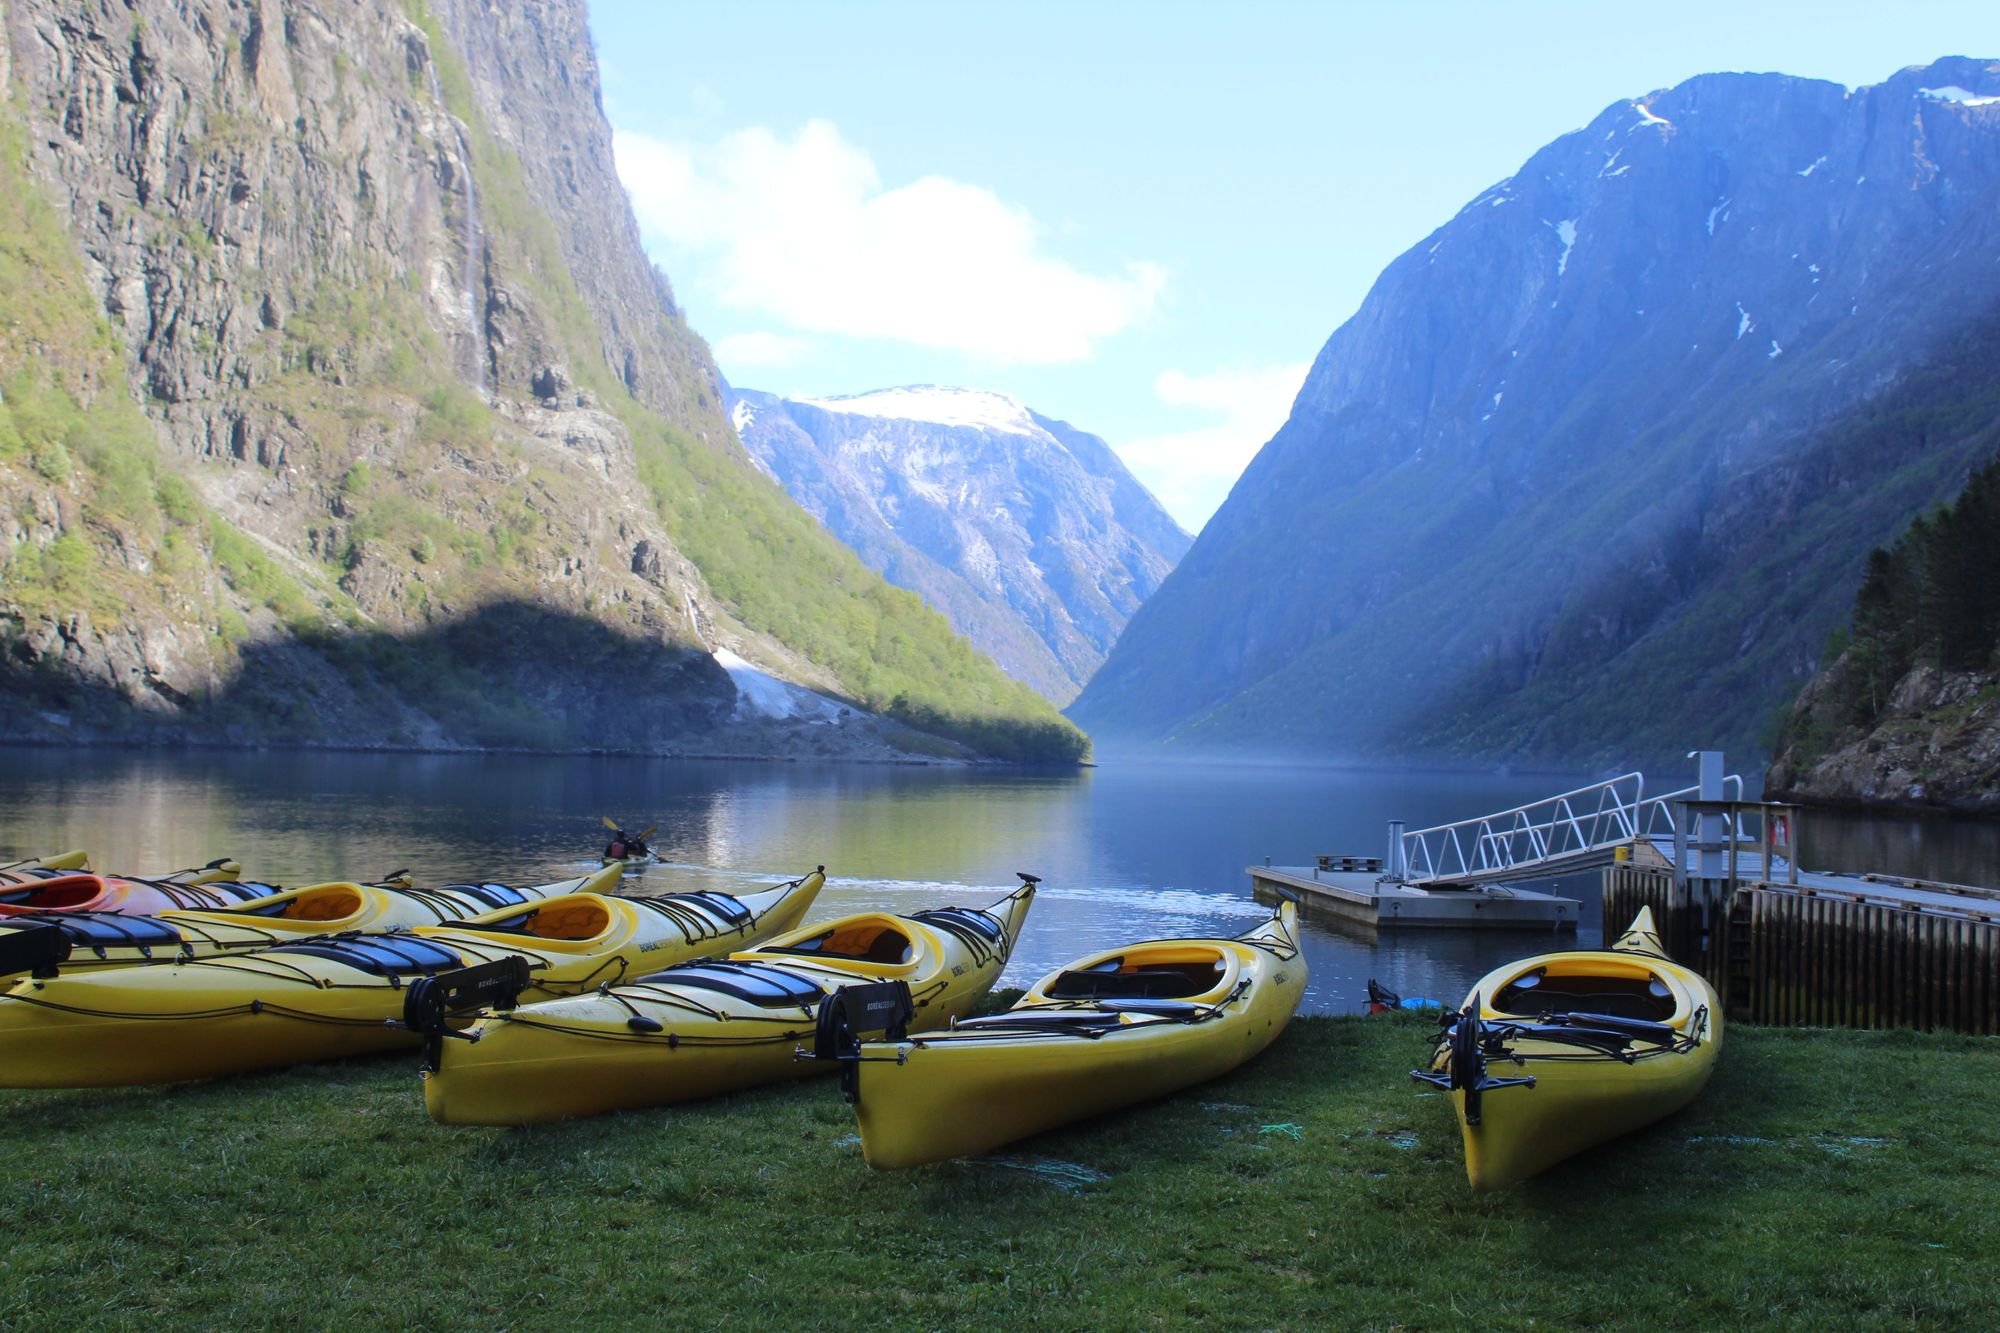 The view from the edge of the Nærøyfjord at Gudvangen, one of Norway's great beauty spots. Photo: Stuart Kenny